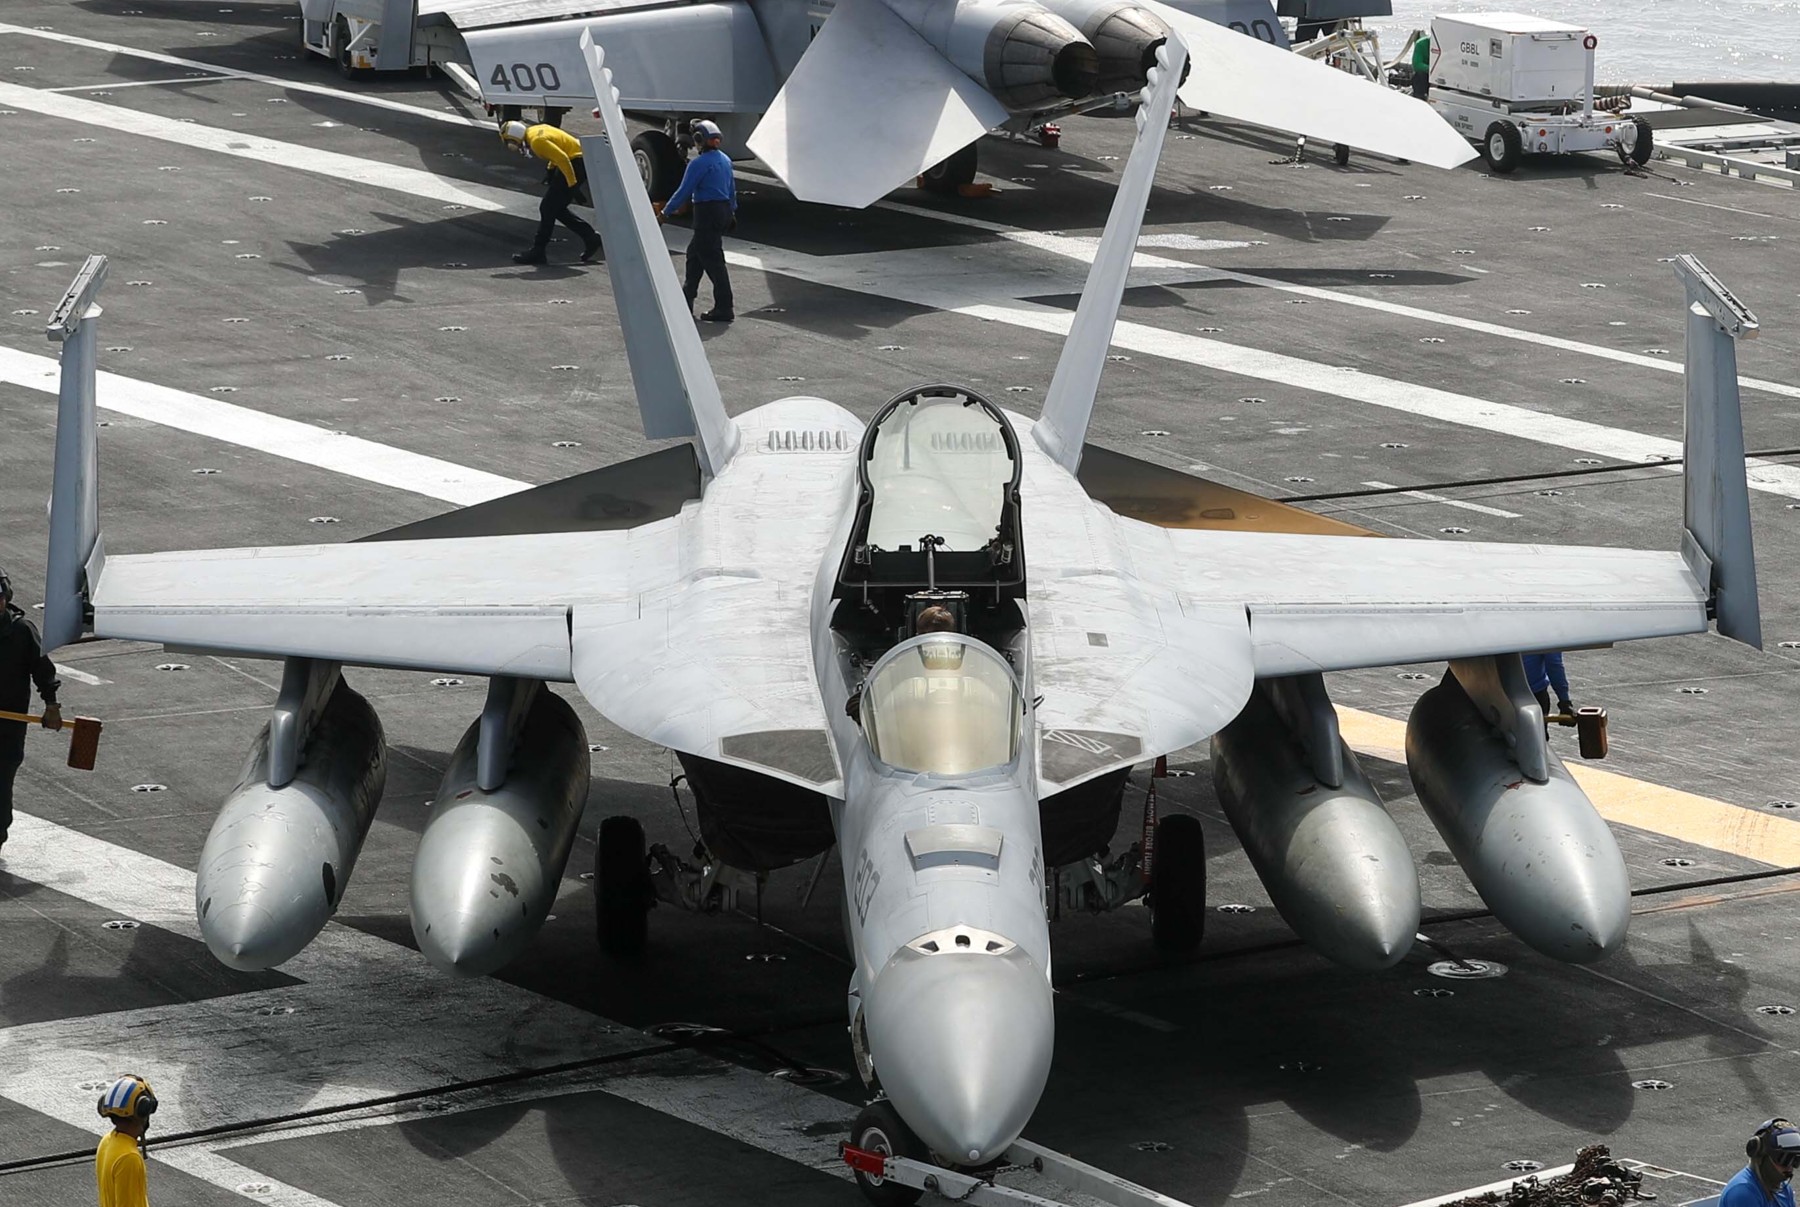 vfa-14 tophatters strike fighter squadron f/a-18e super hornet cvn-72 uss abraham lincoln cvw-9 us navy 46